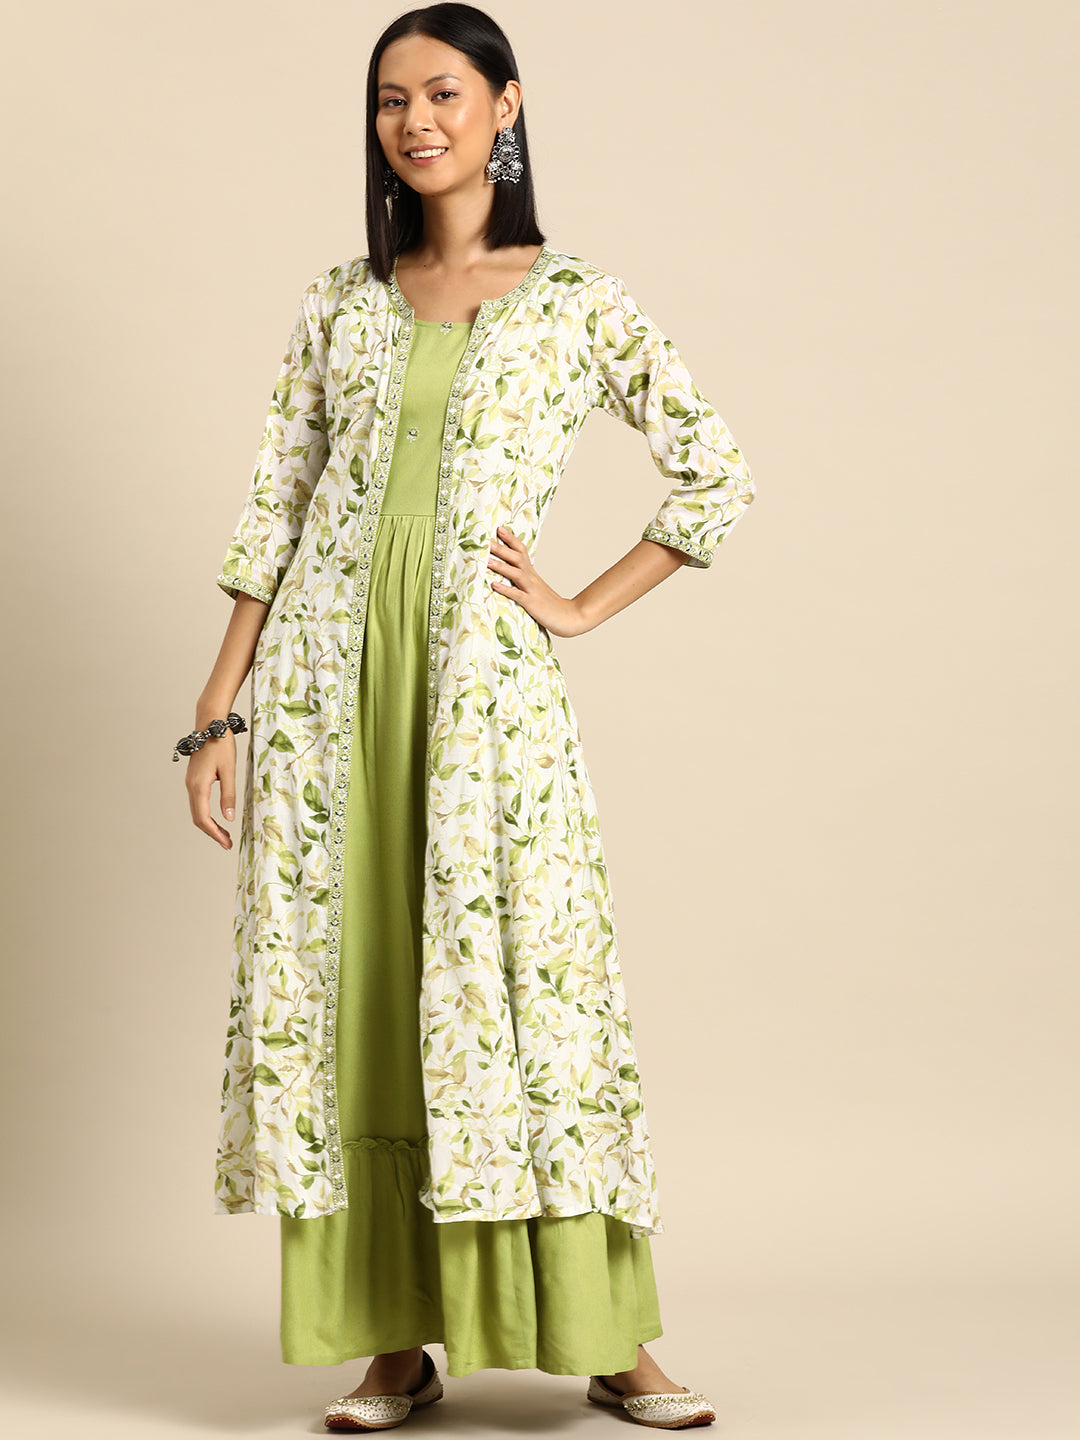 Women's Green Embroidered Flared Dress With Prinrted Jacket - Nayo Clothing